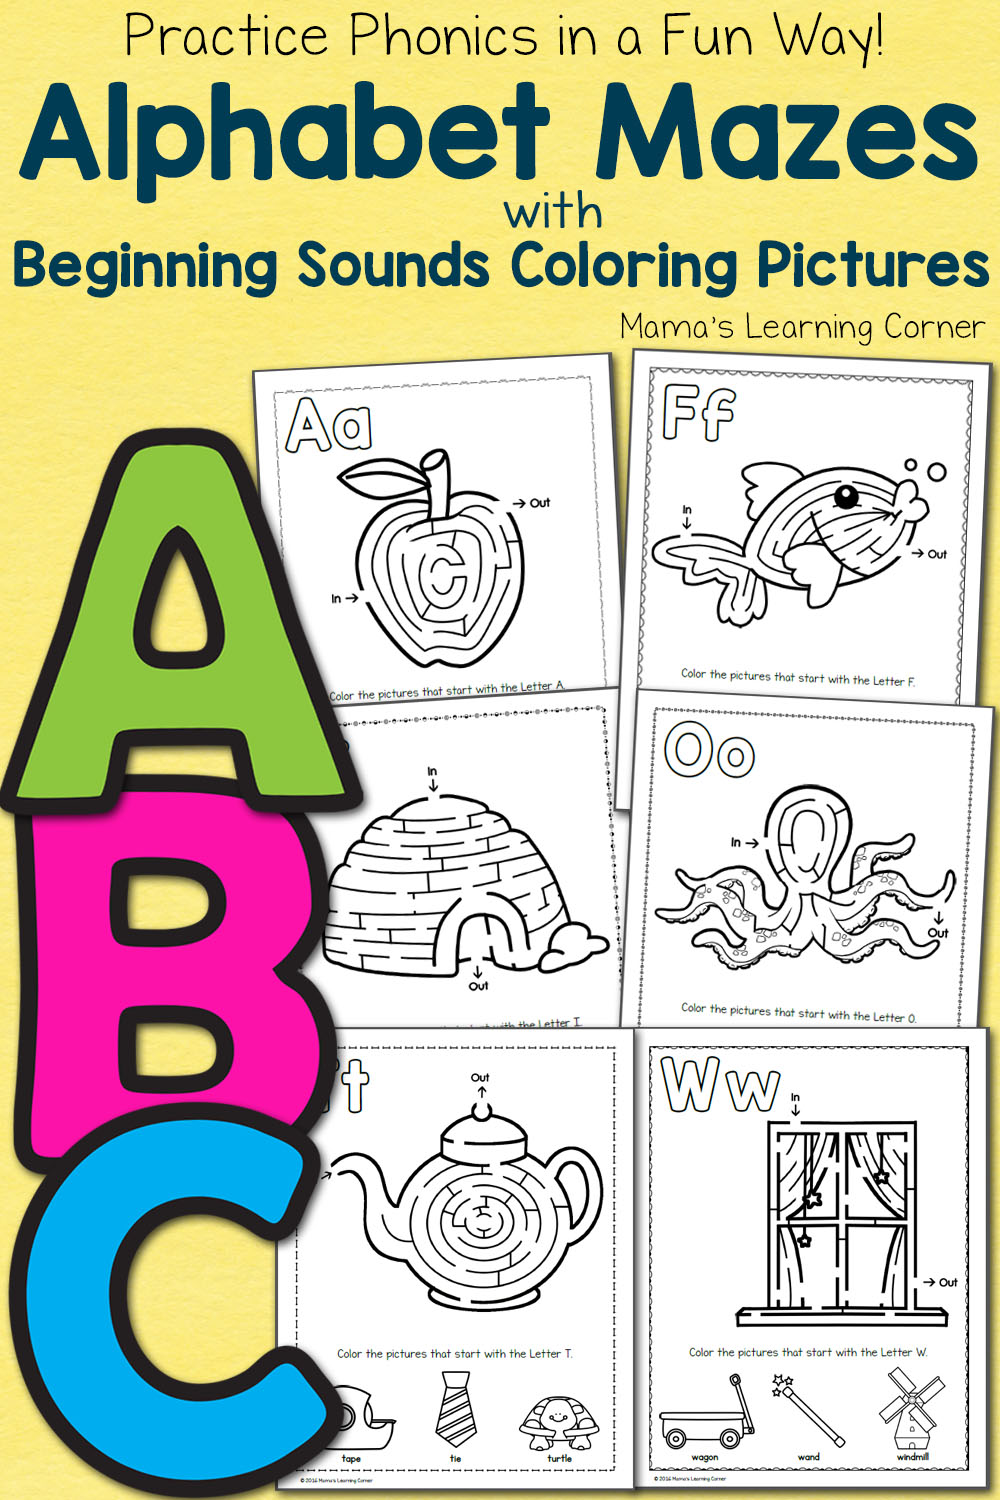 Alphabet Mazes with Beginning Sounds Coloring Pictures